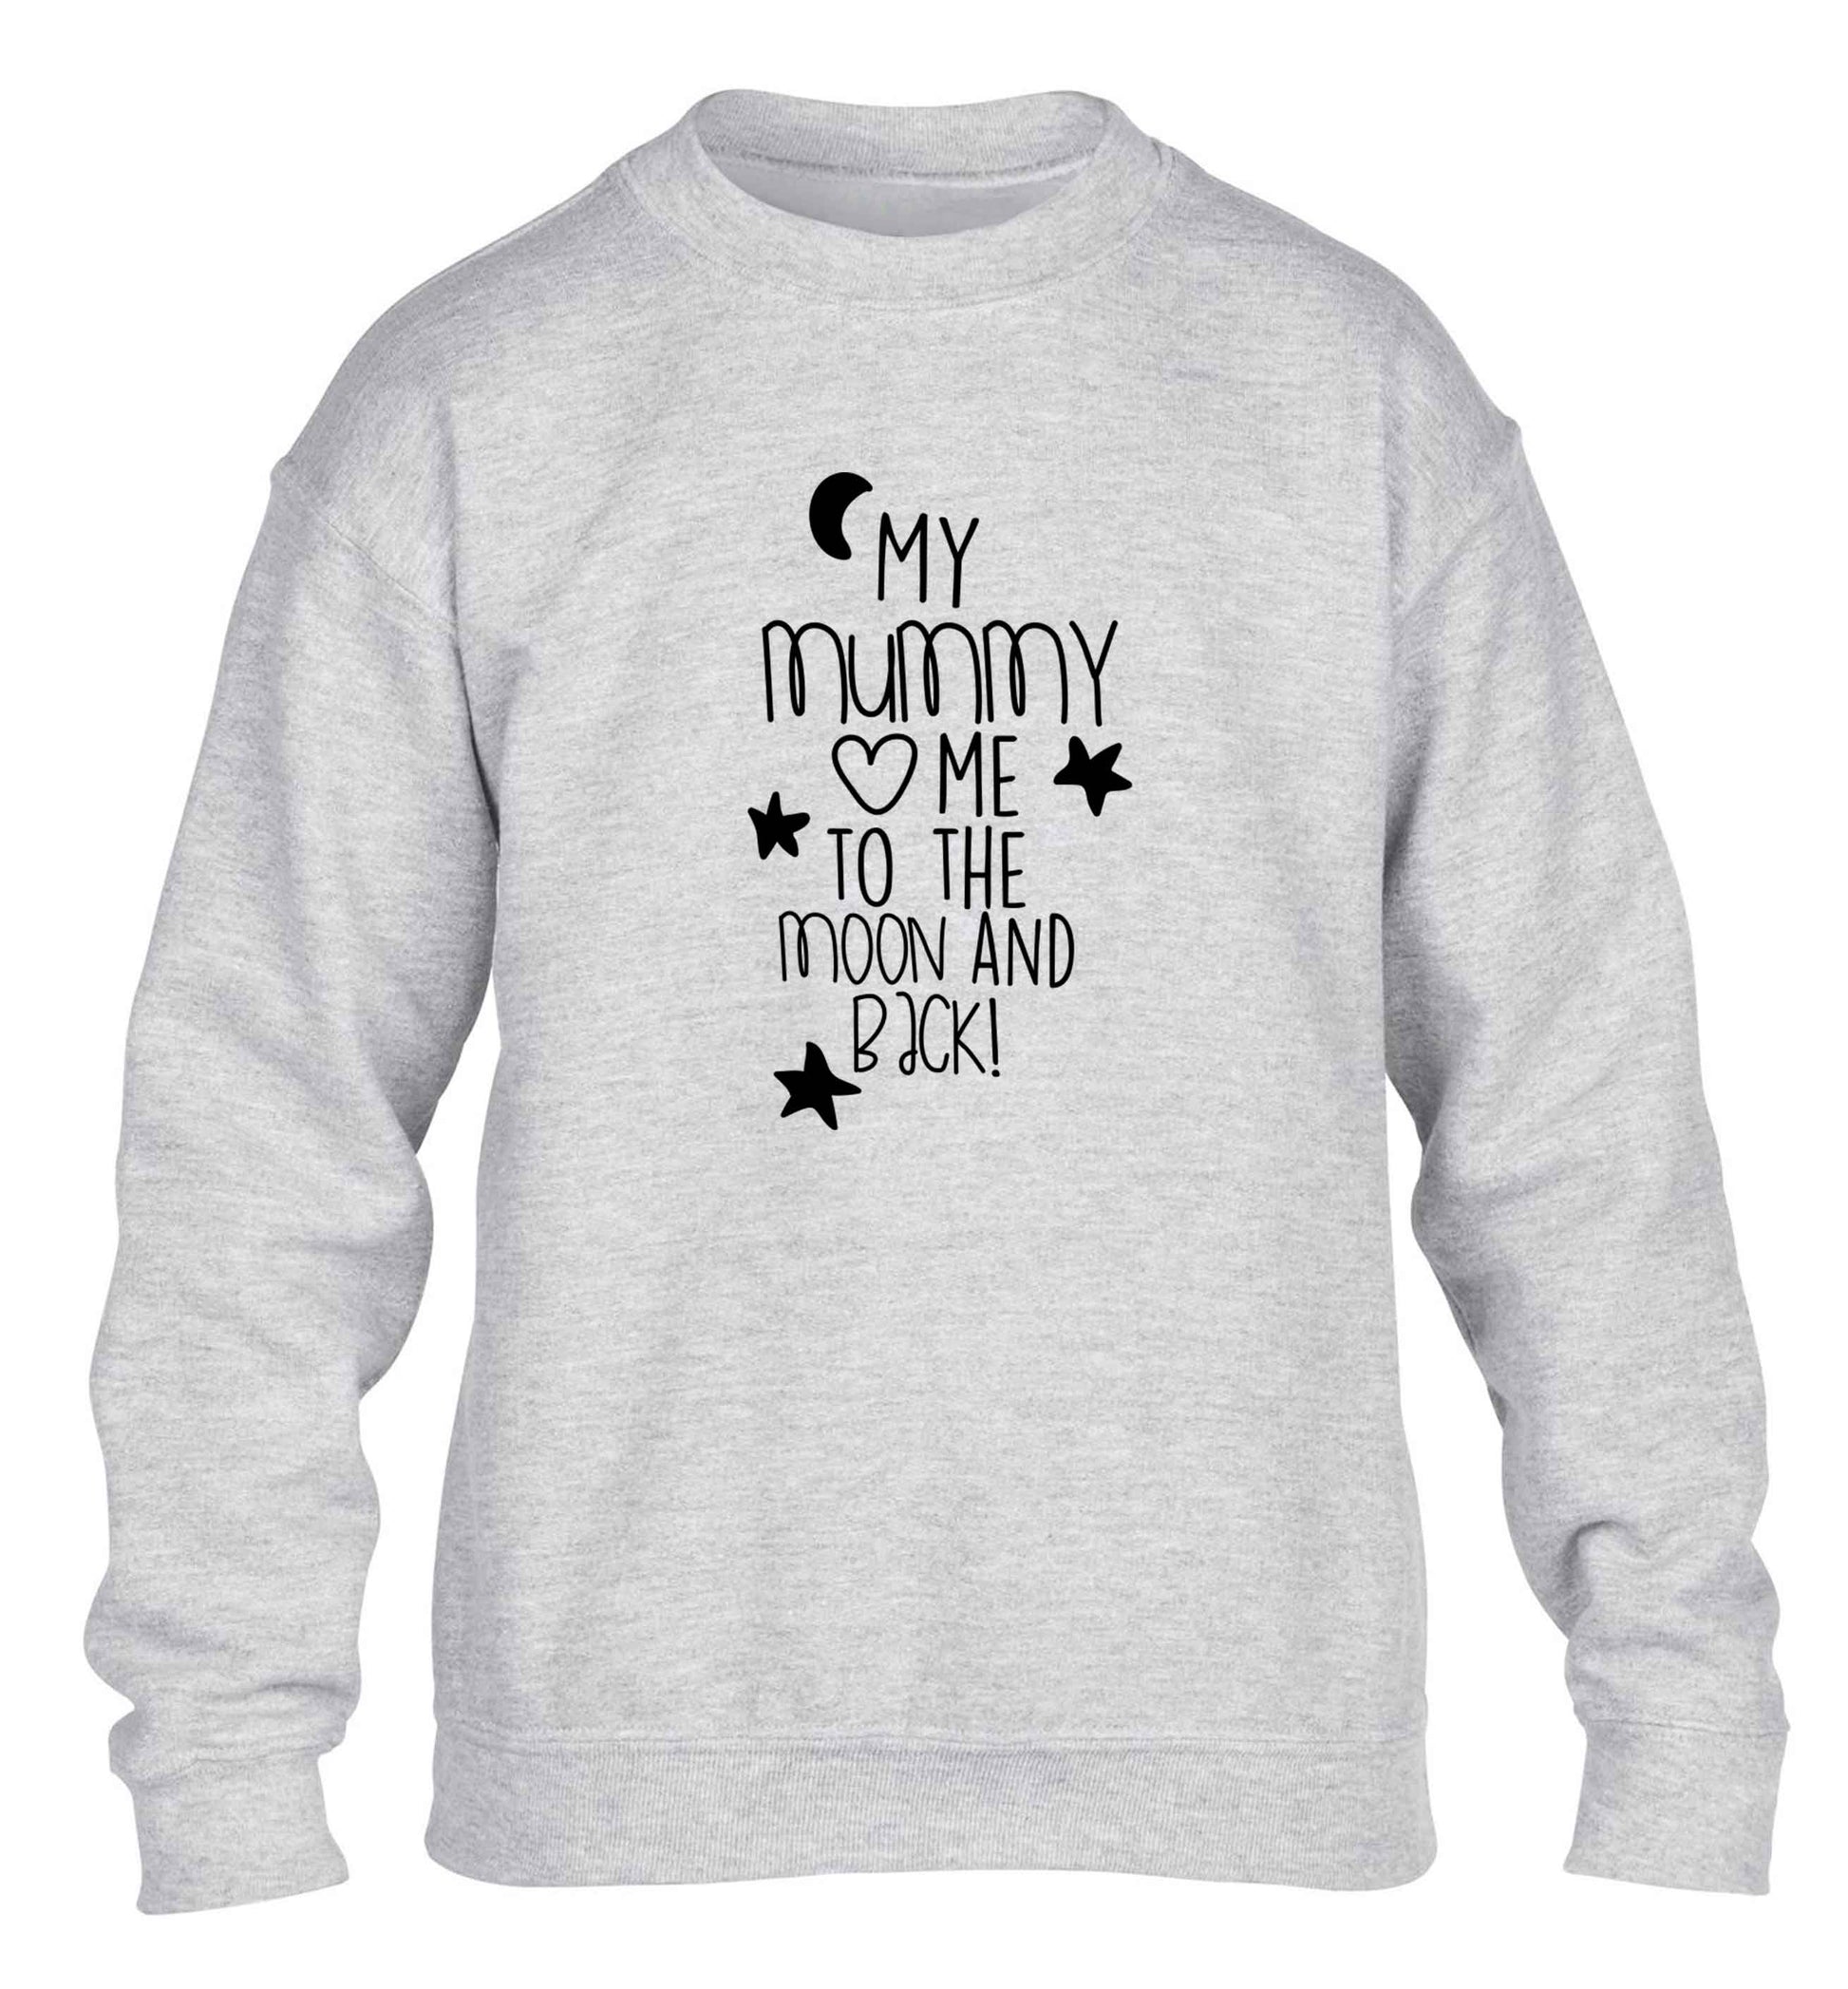 My mum loves me to the moon and back children's grey sweater 12-13 Years